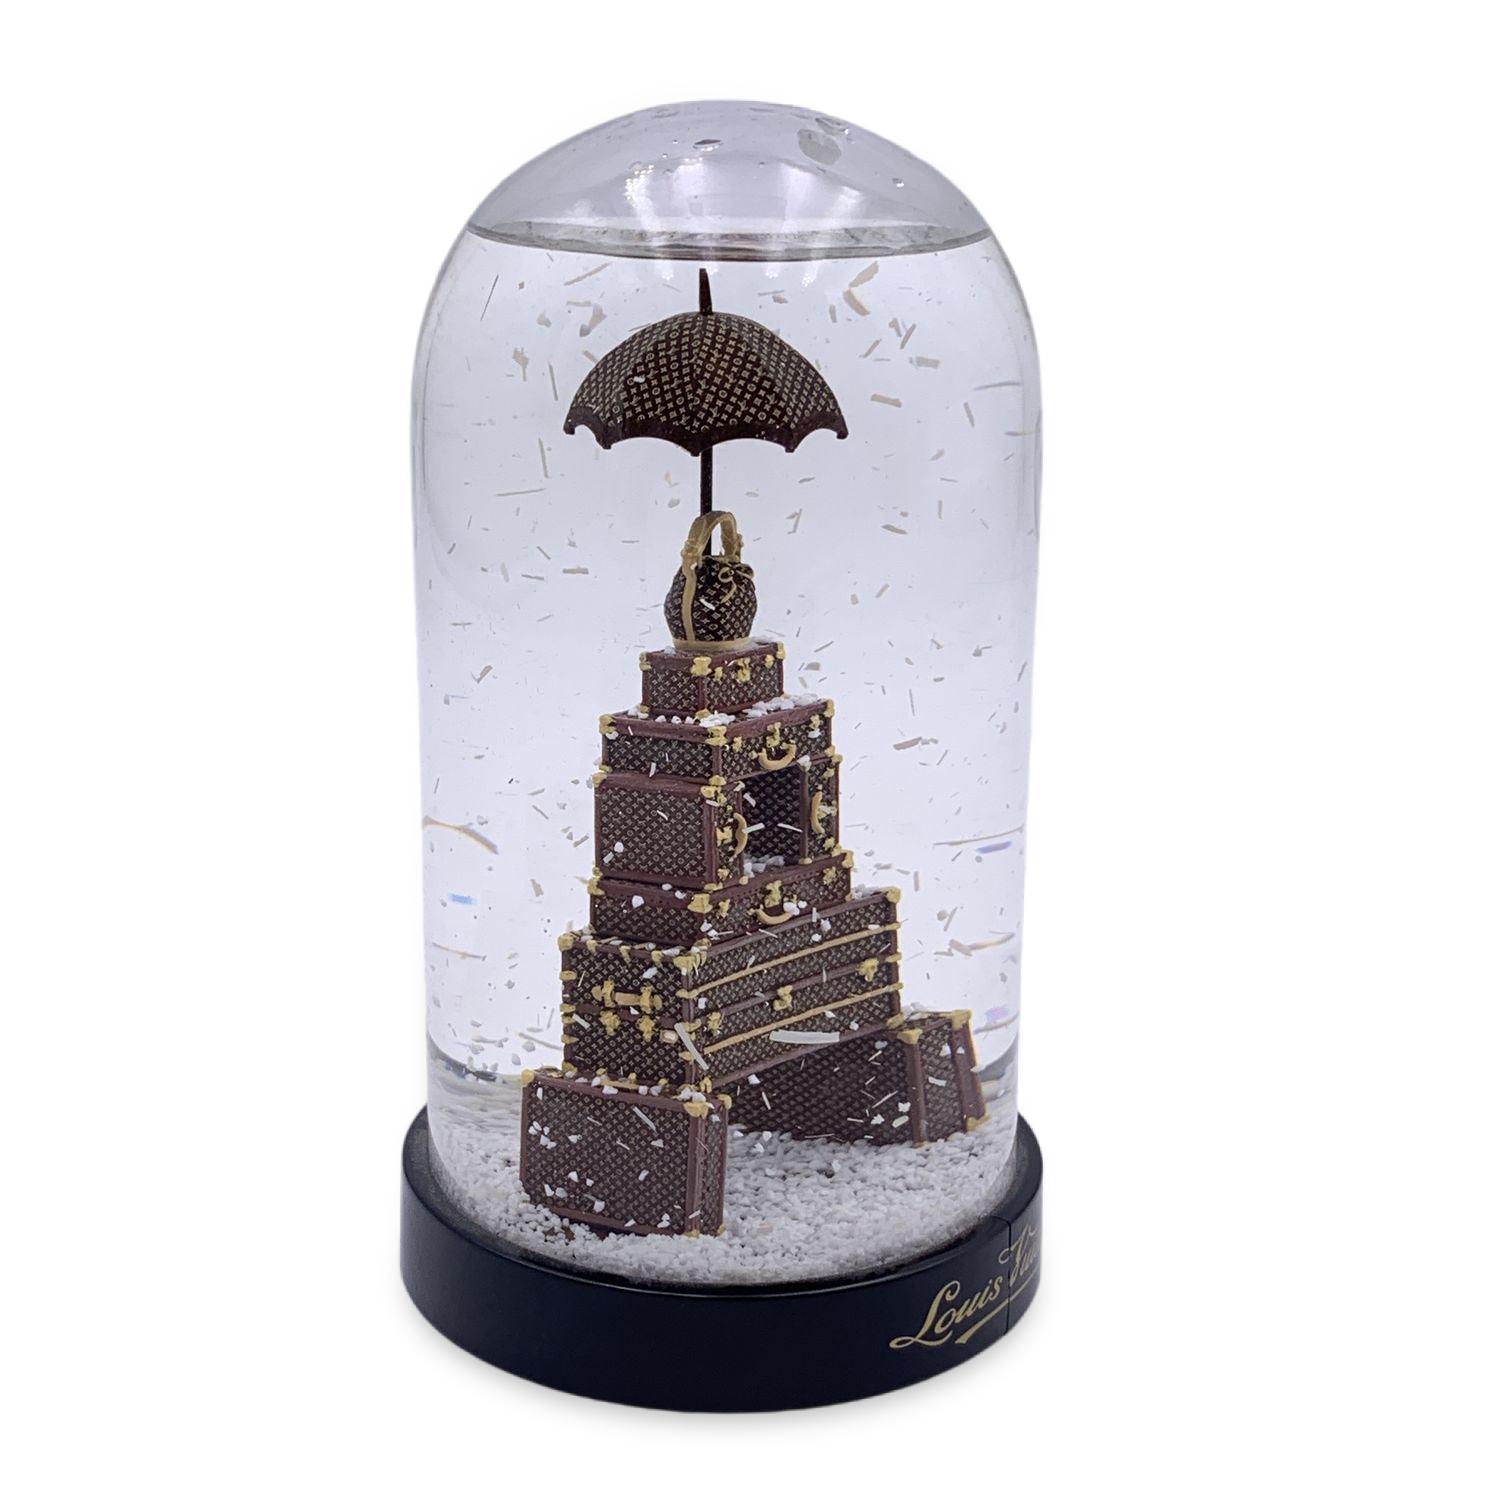 Louis Vuitton Rare Snow Globe Suitcase Eiffel Tower Home Decor In Good Condition For Sale In Rome, Rome